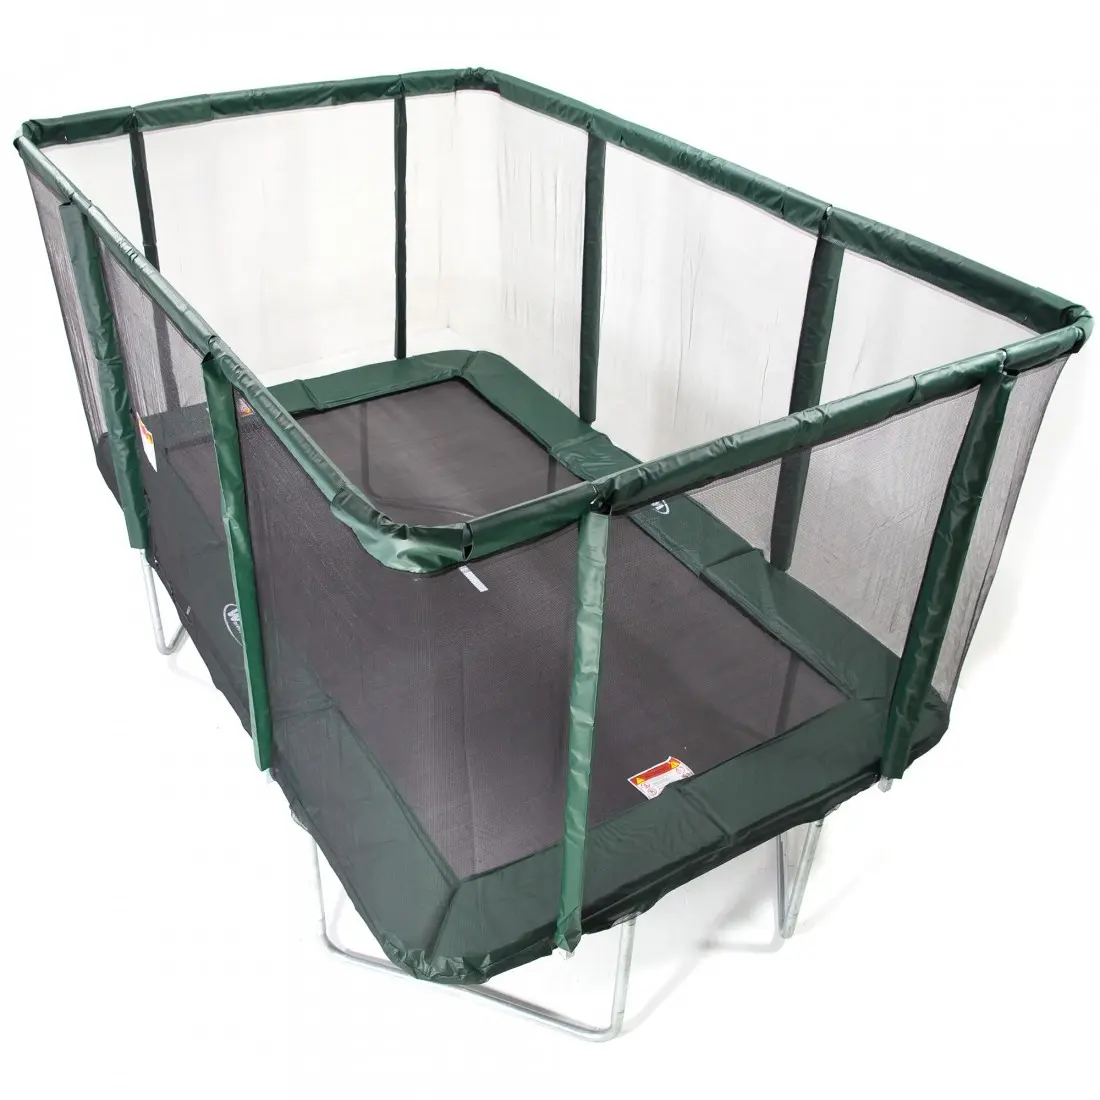 Spring Rectangle 9X14FT Trampoline with Enclosure